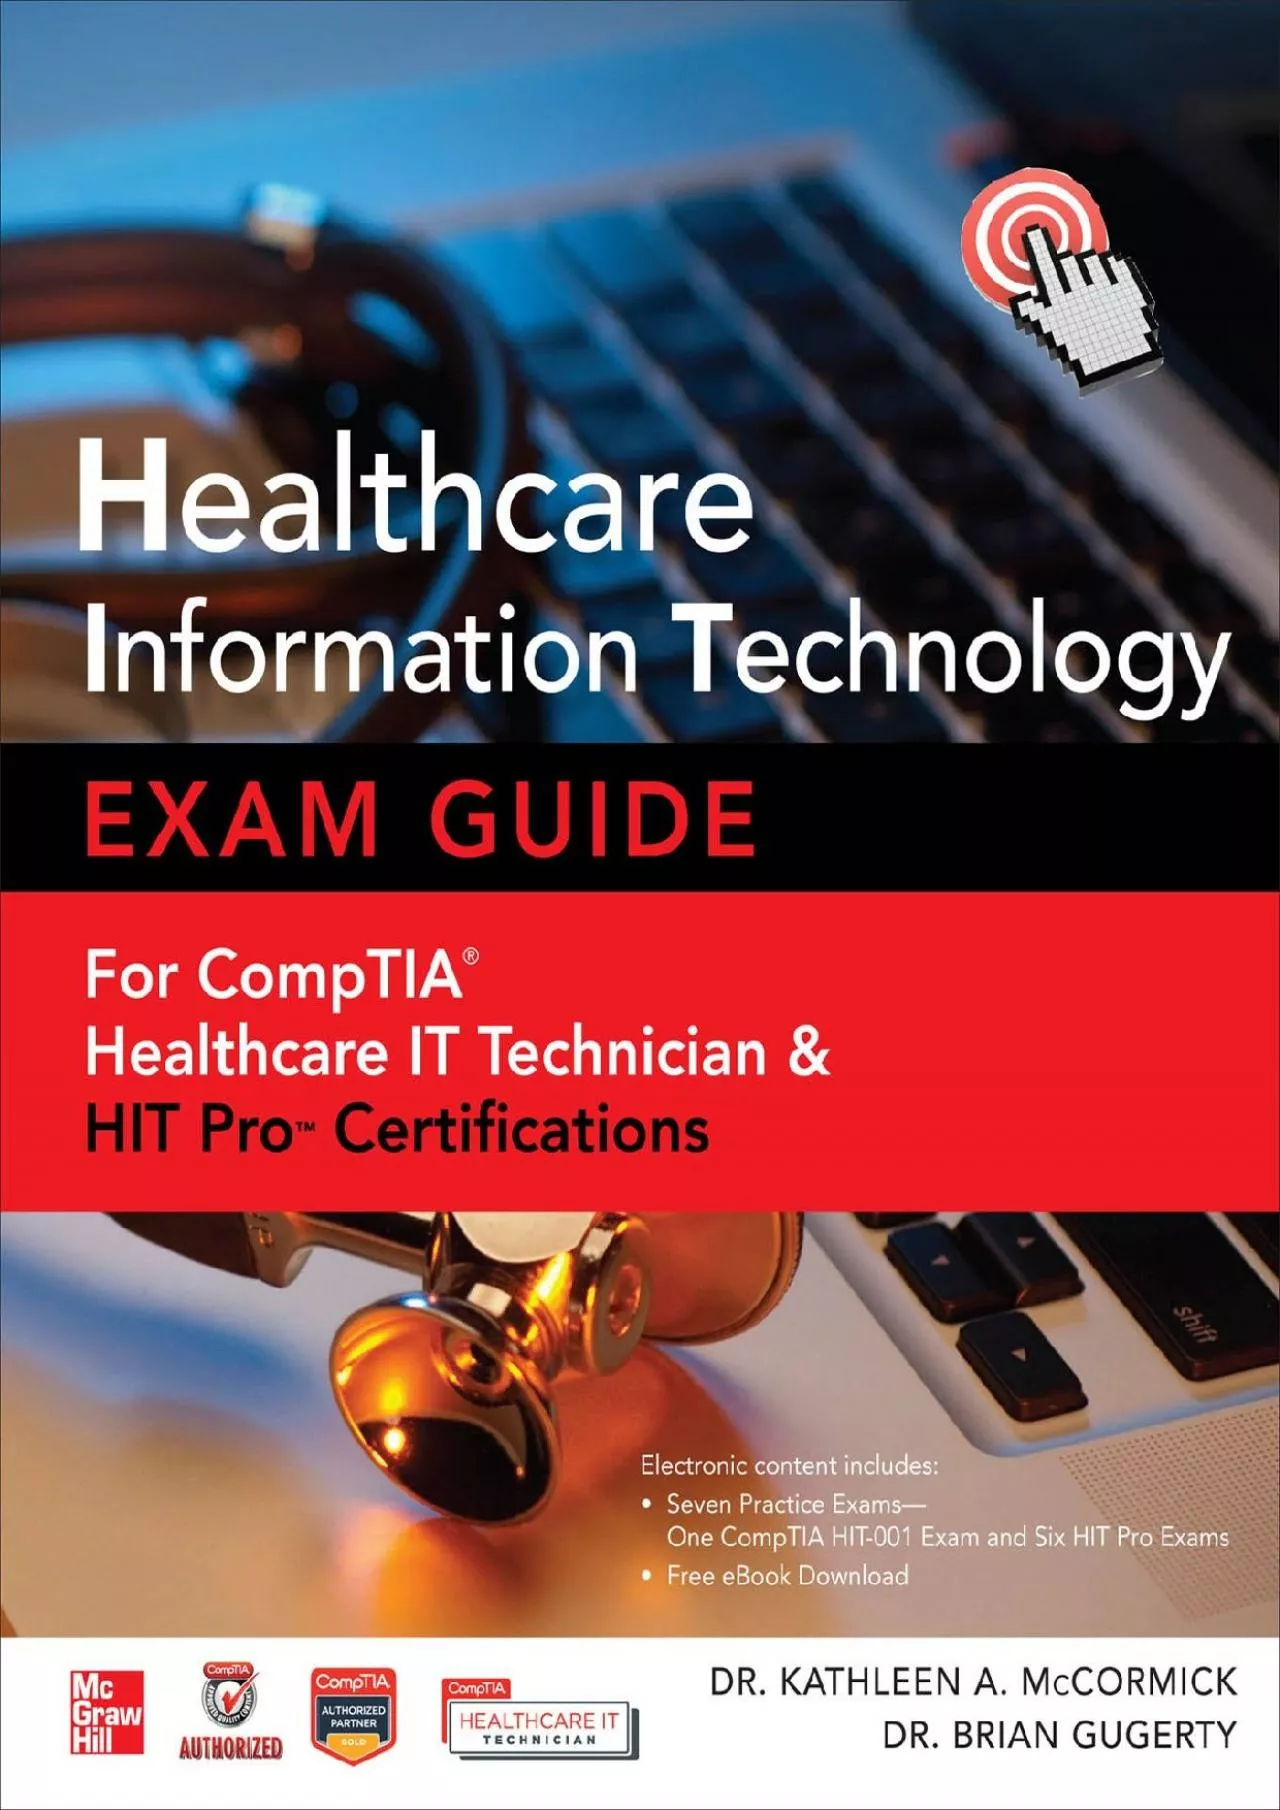 [DOWLOAD]-Healthcare Information Technology Exam Guide for CompTIA Healthcare IT Technician